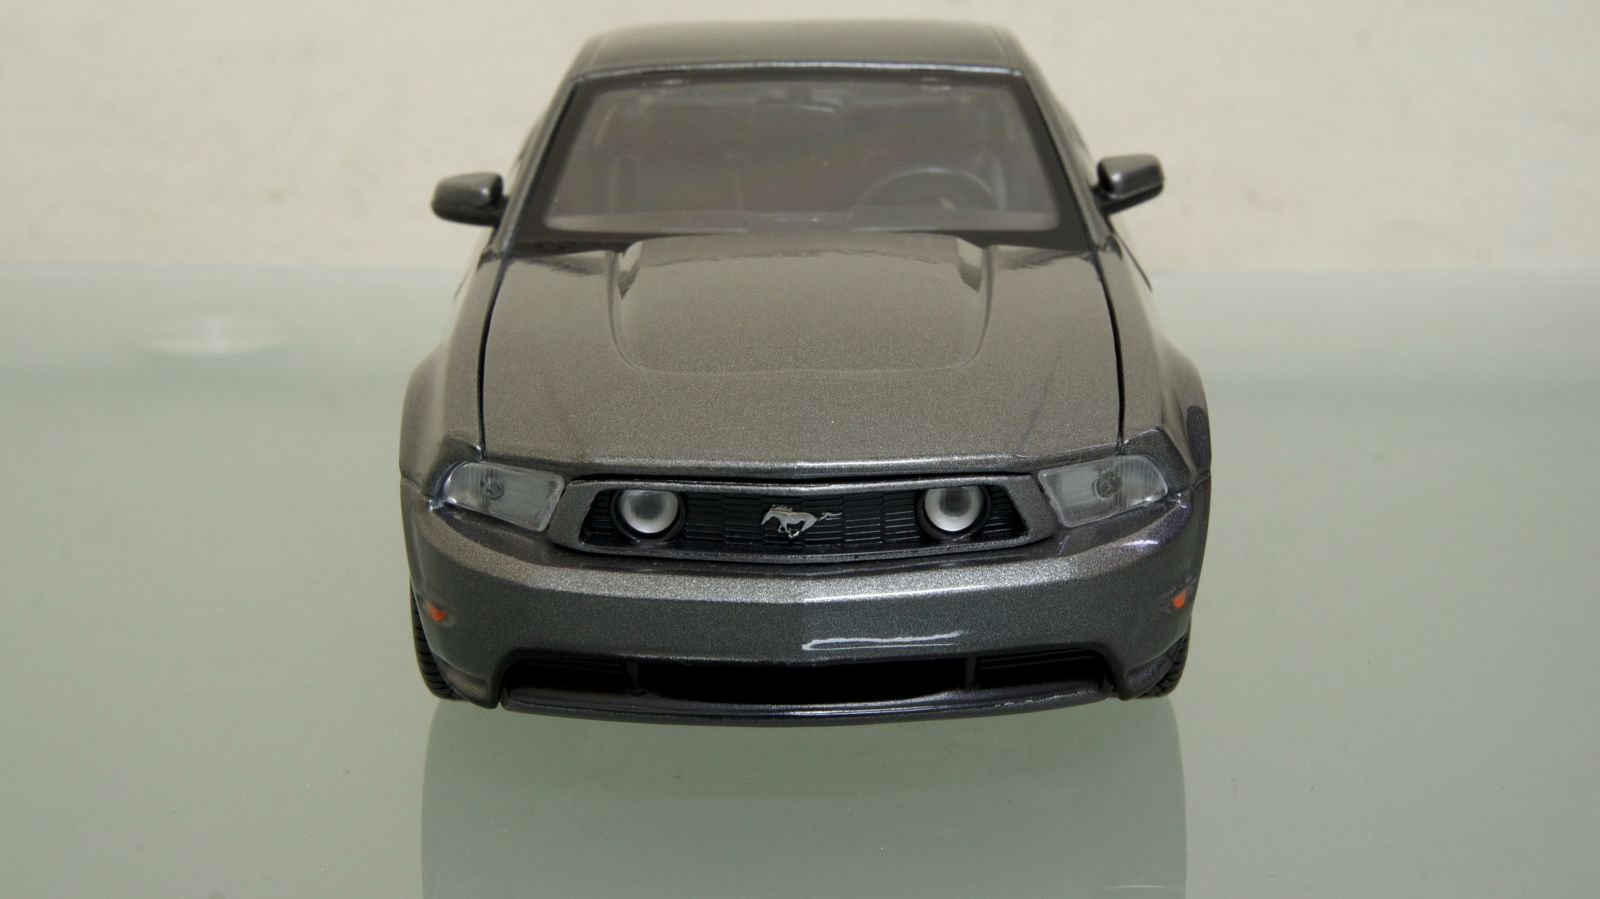 Illustration for article titled Maisto 1:24 2011 Ford Mustang GT